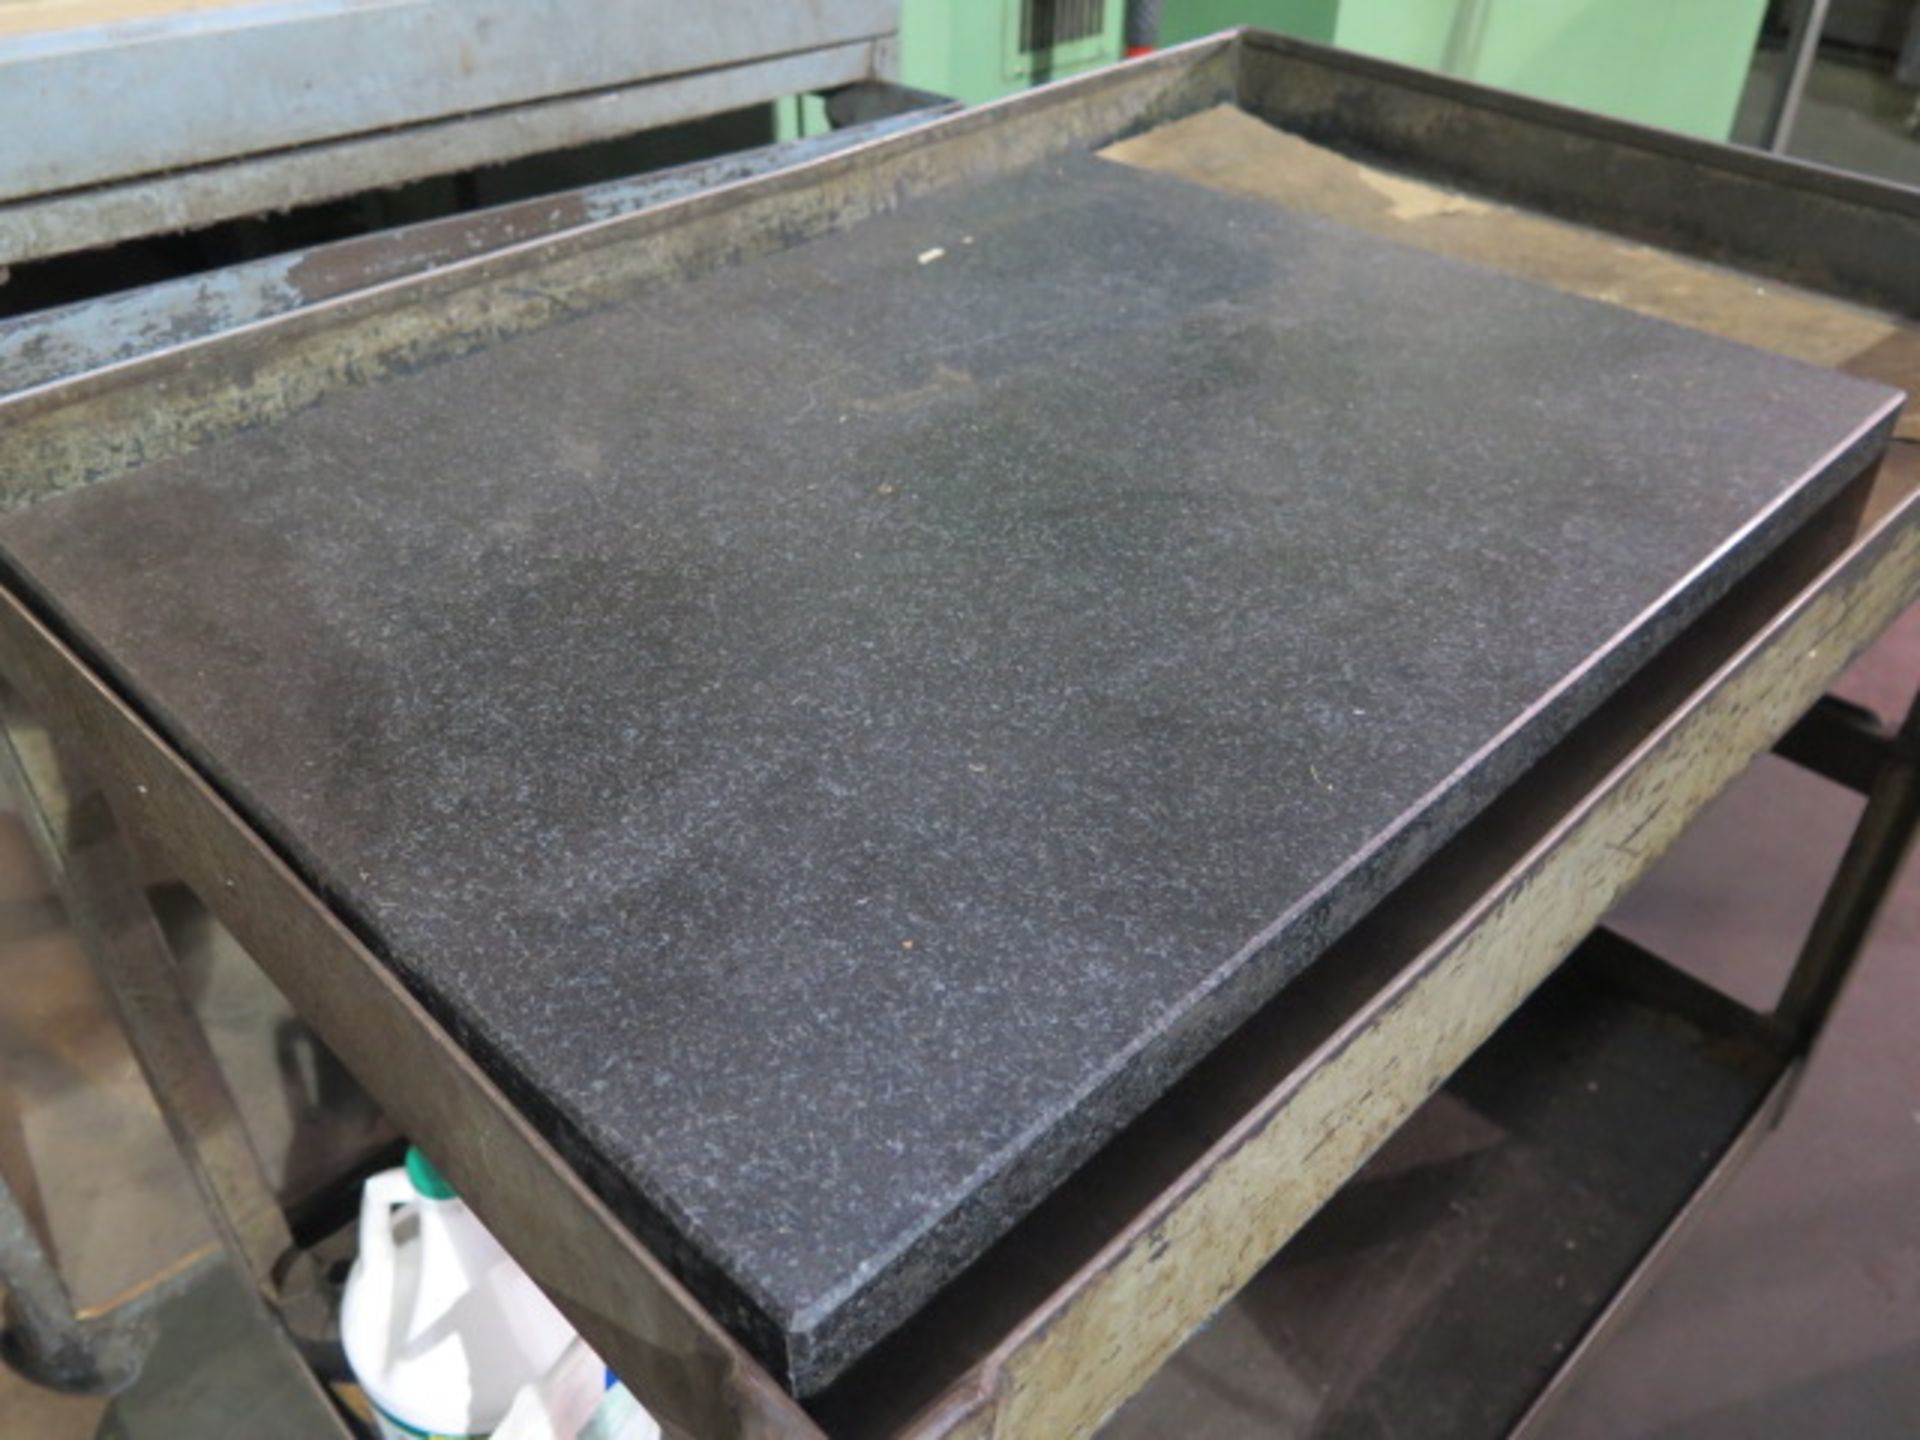 18" x 24" x 3" Granite Surface Plate w/ Cart (SOLD AS-IS - NO WARRANTY) - Image 2 of 2